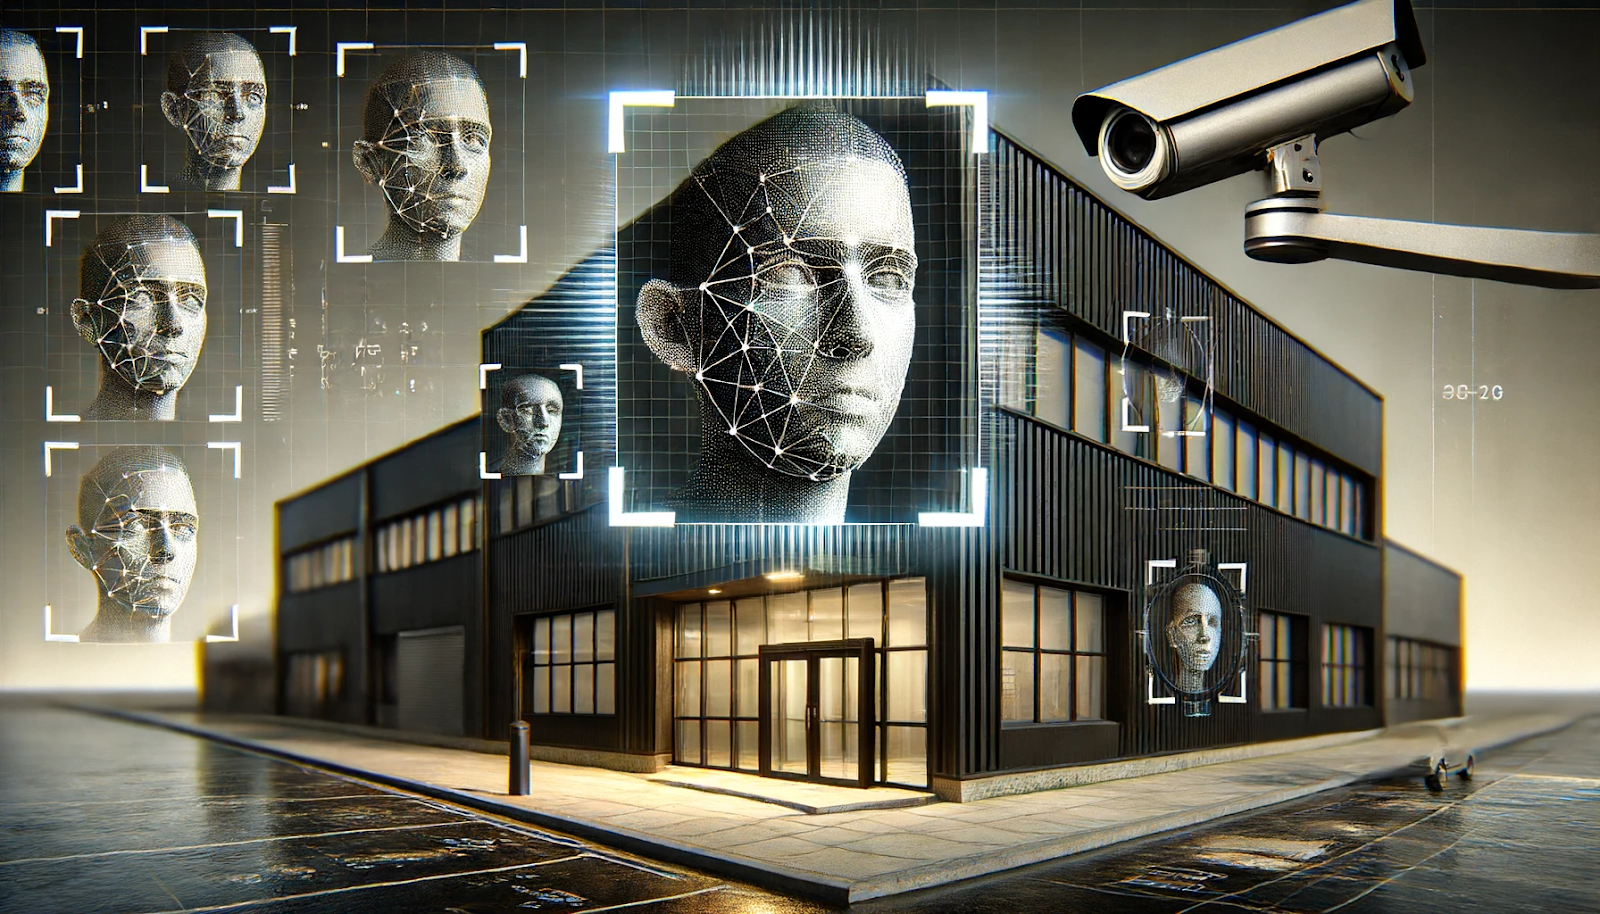 A photorealistic image symbolically representing facial recognition technology in security services, featuring a secure building with a high-tech surveillance camera and a digital facial recognition interface overlay.  